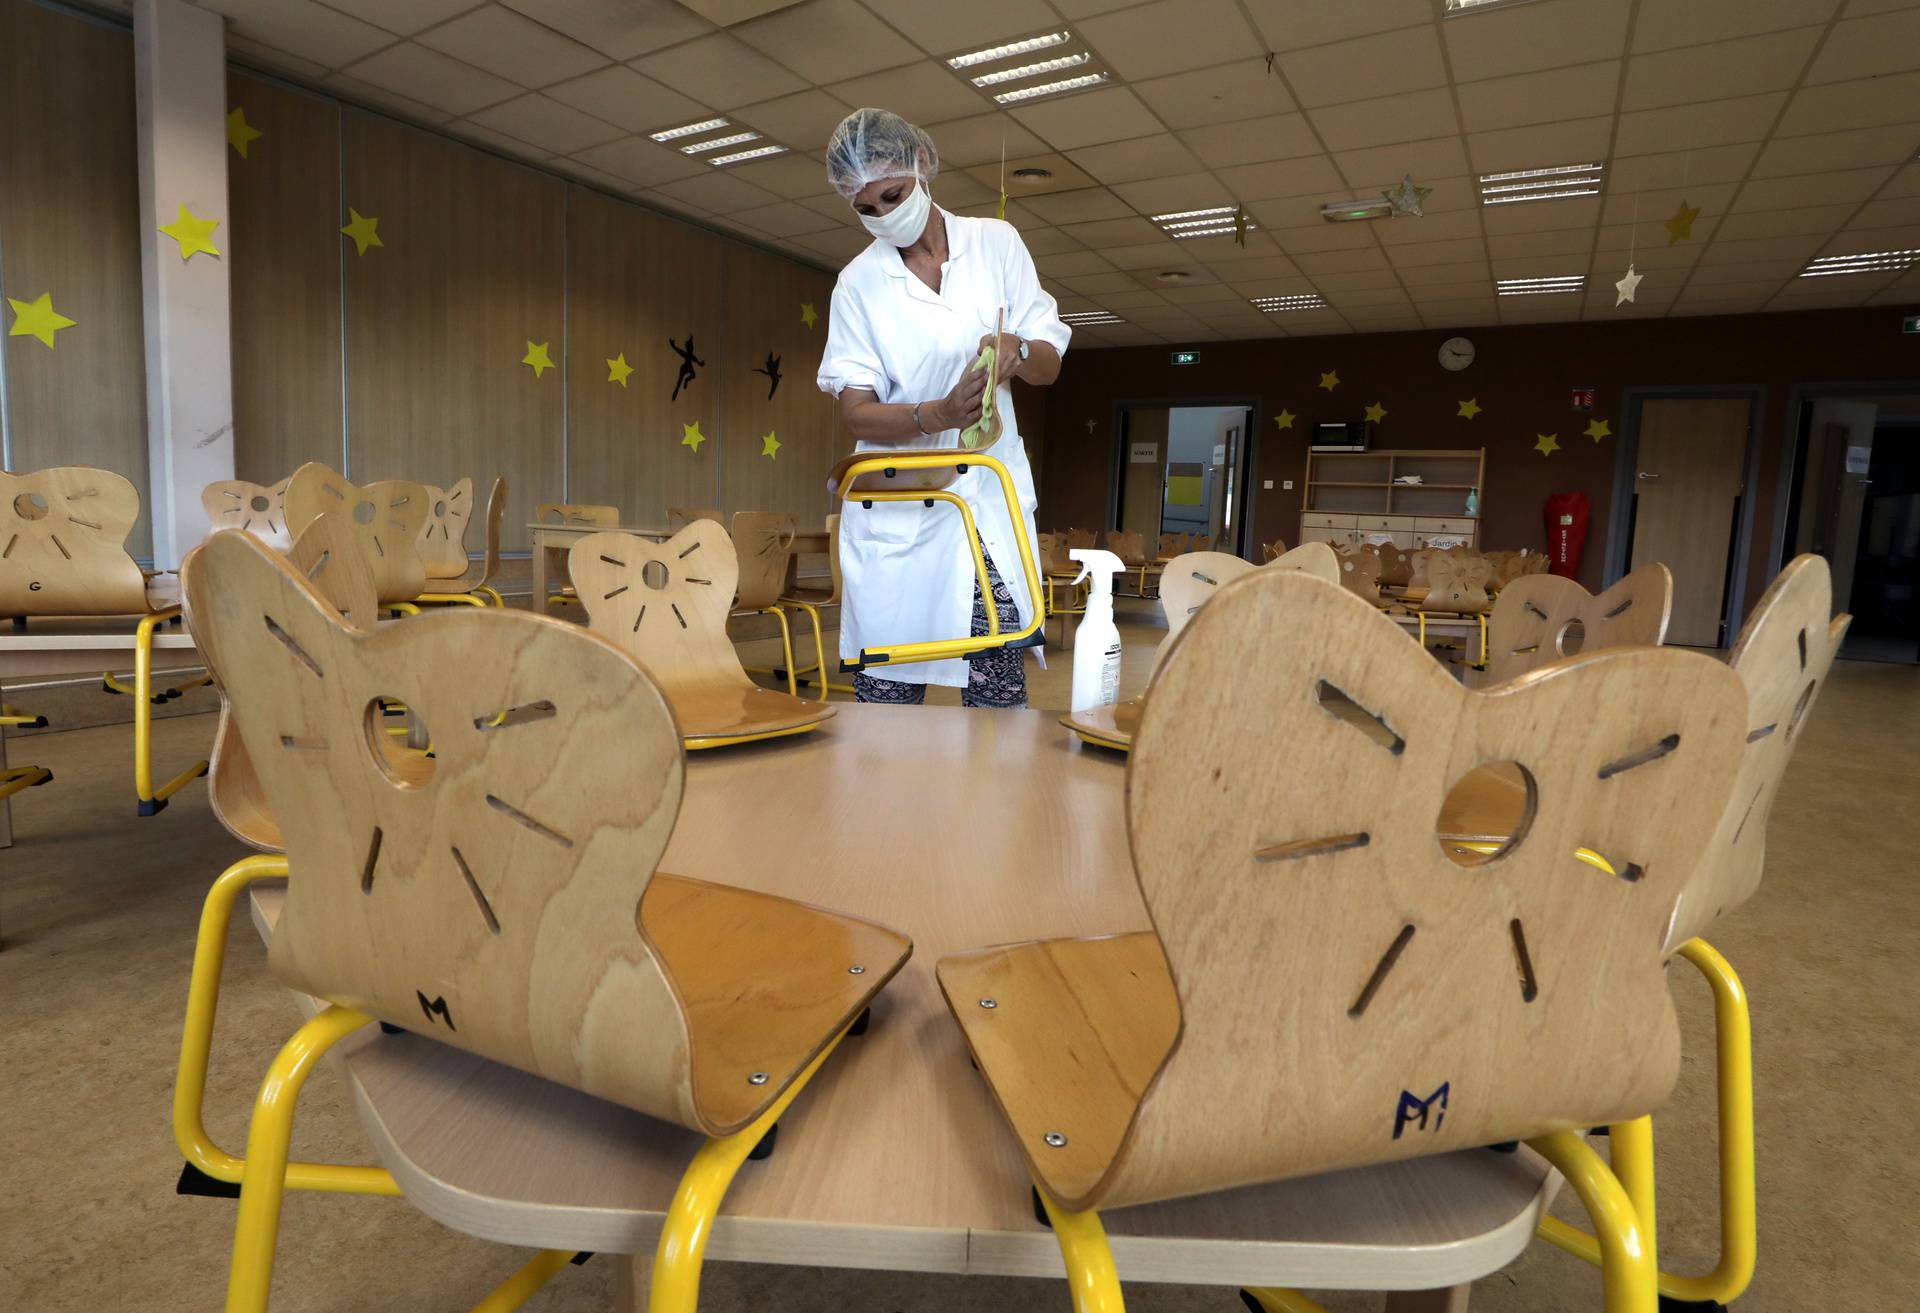 A municipal employee, wearing a protective face mask, cleans chairs in the canteen at a primary school in Le Cannet